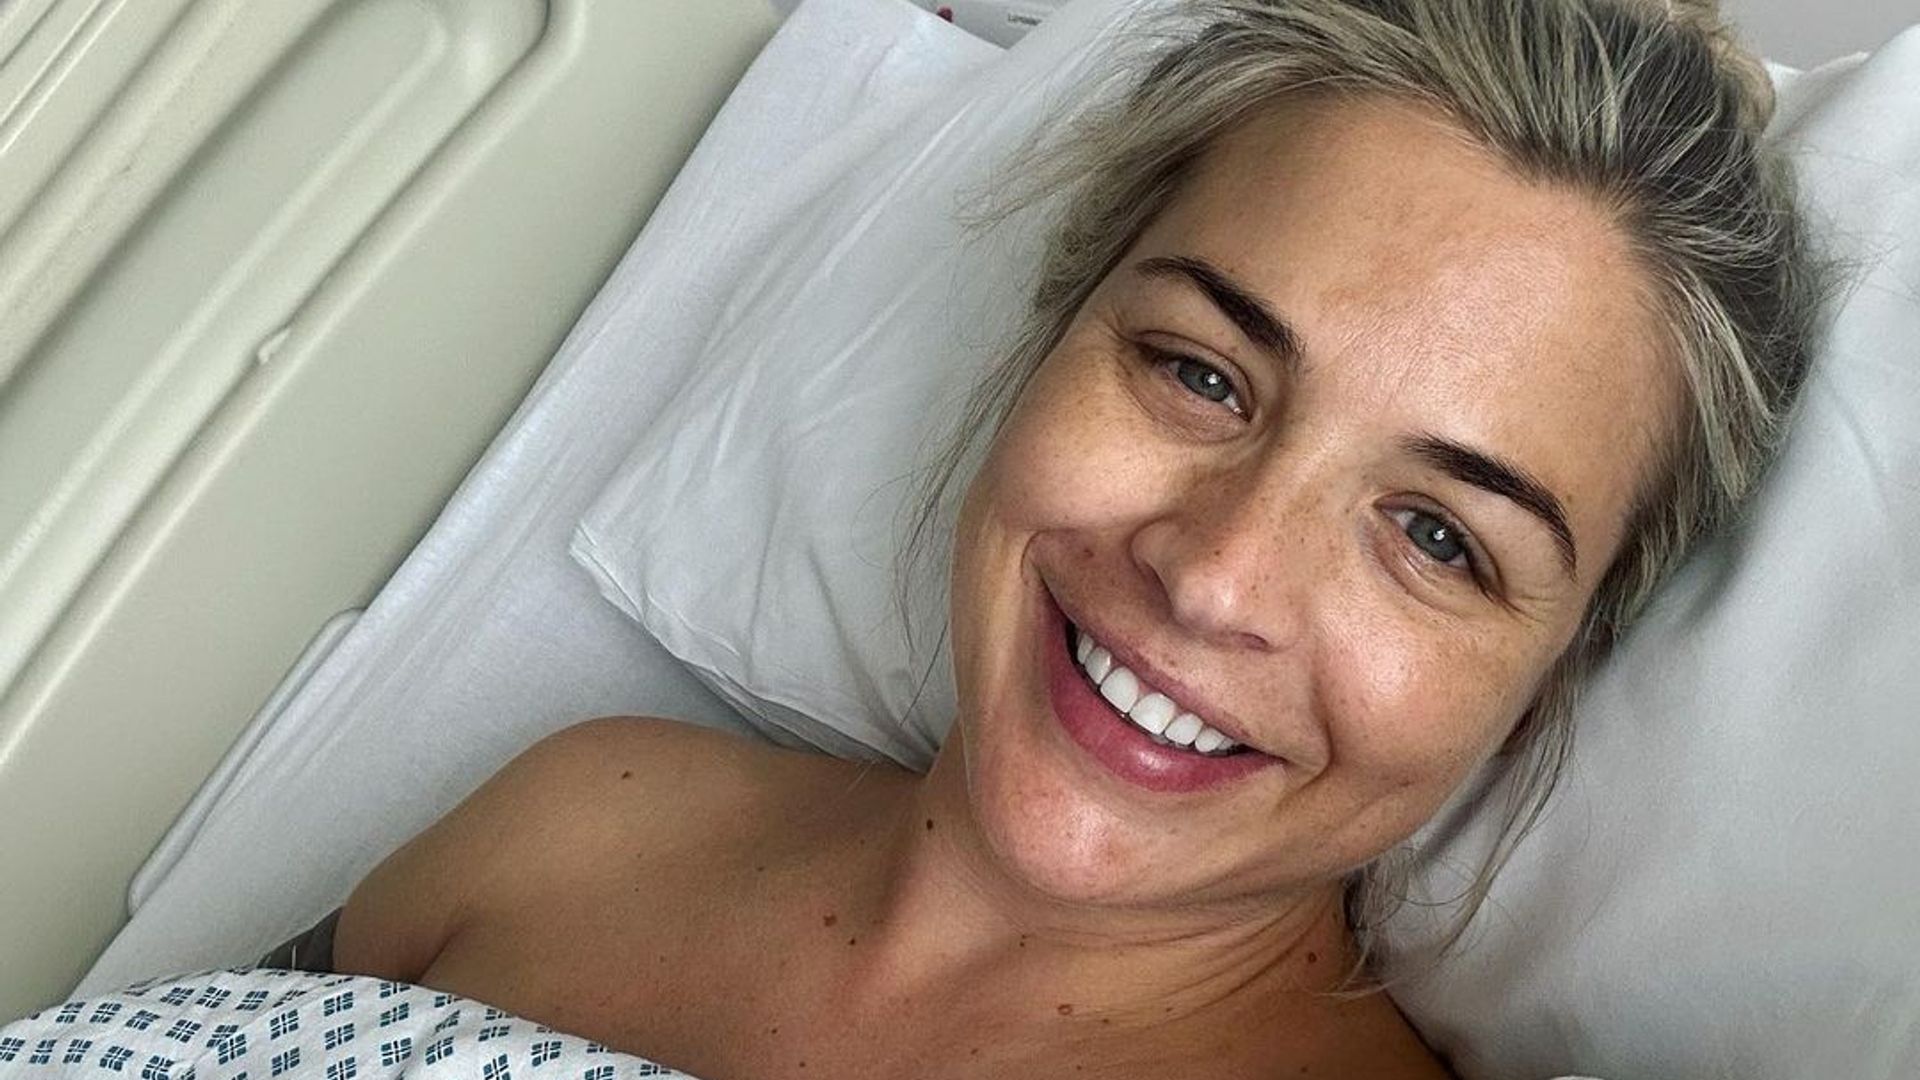 Gemma Atkinson smiling in a hospital bed